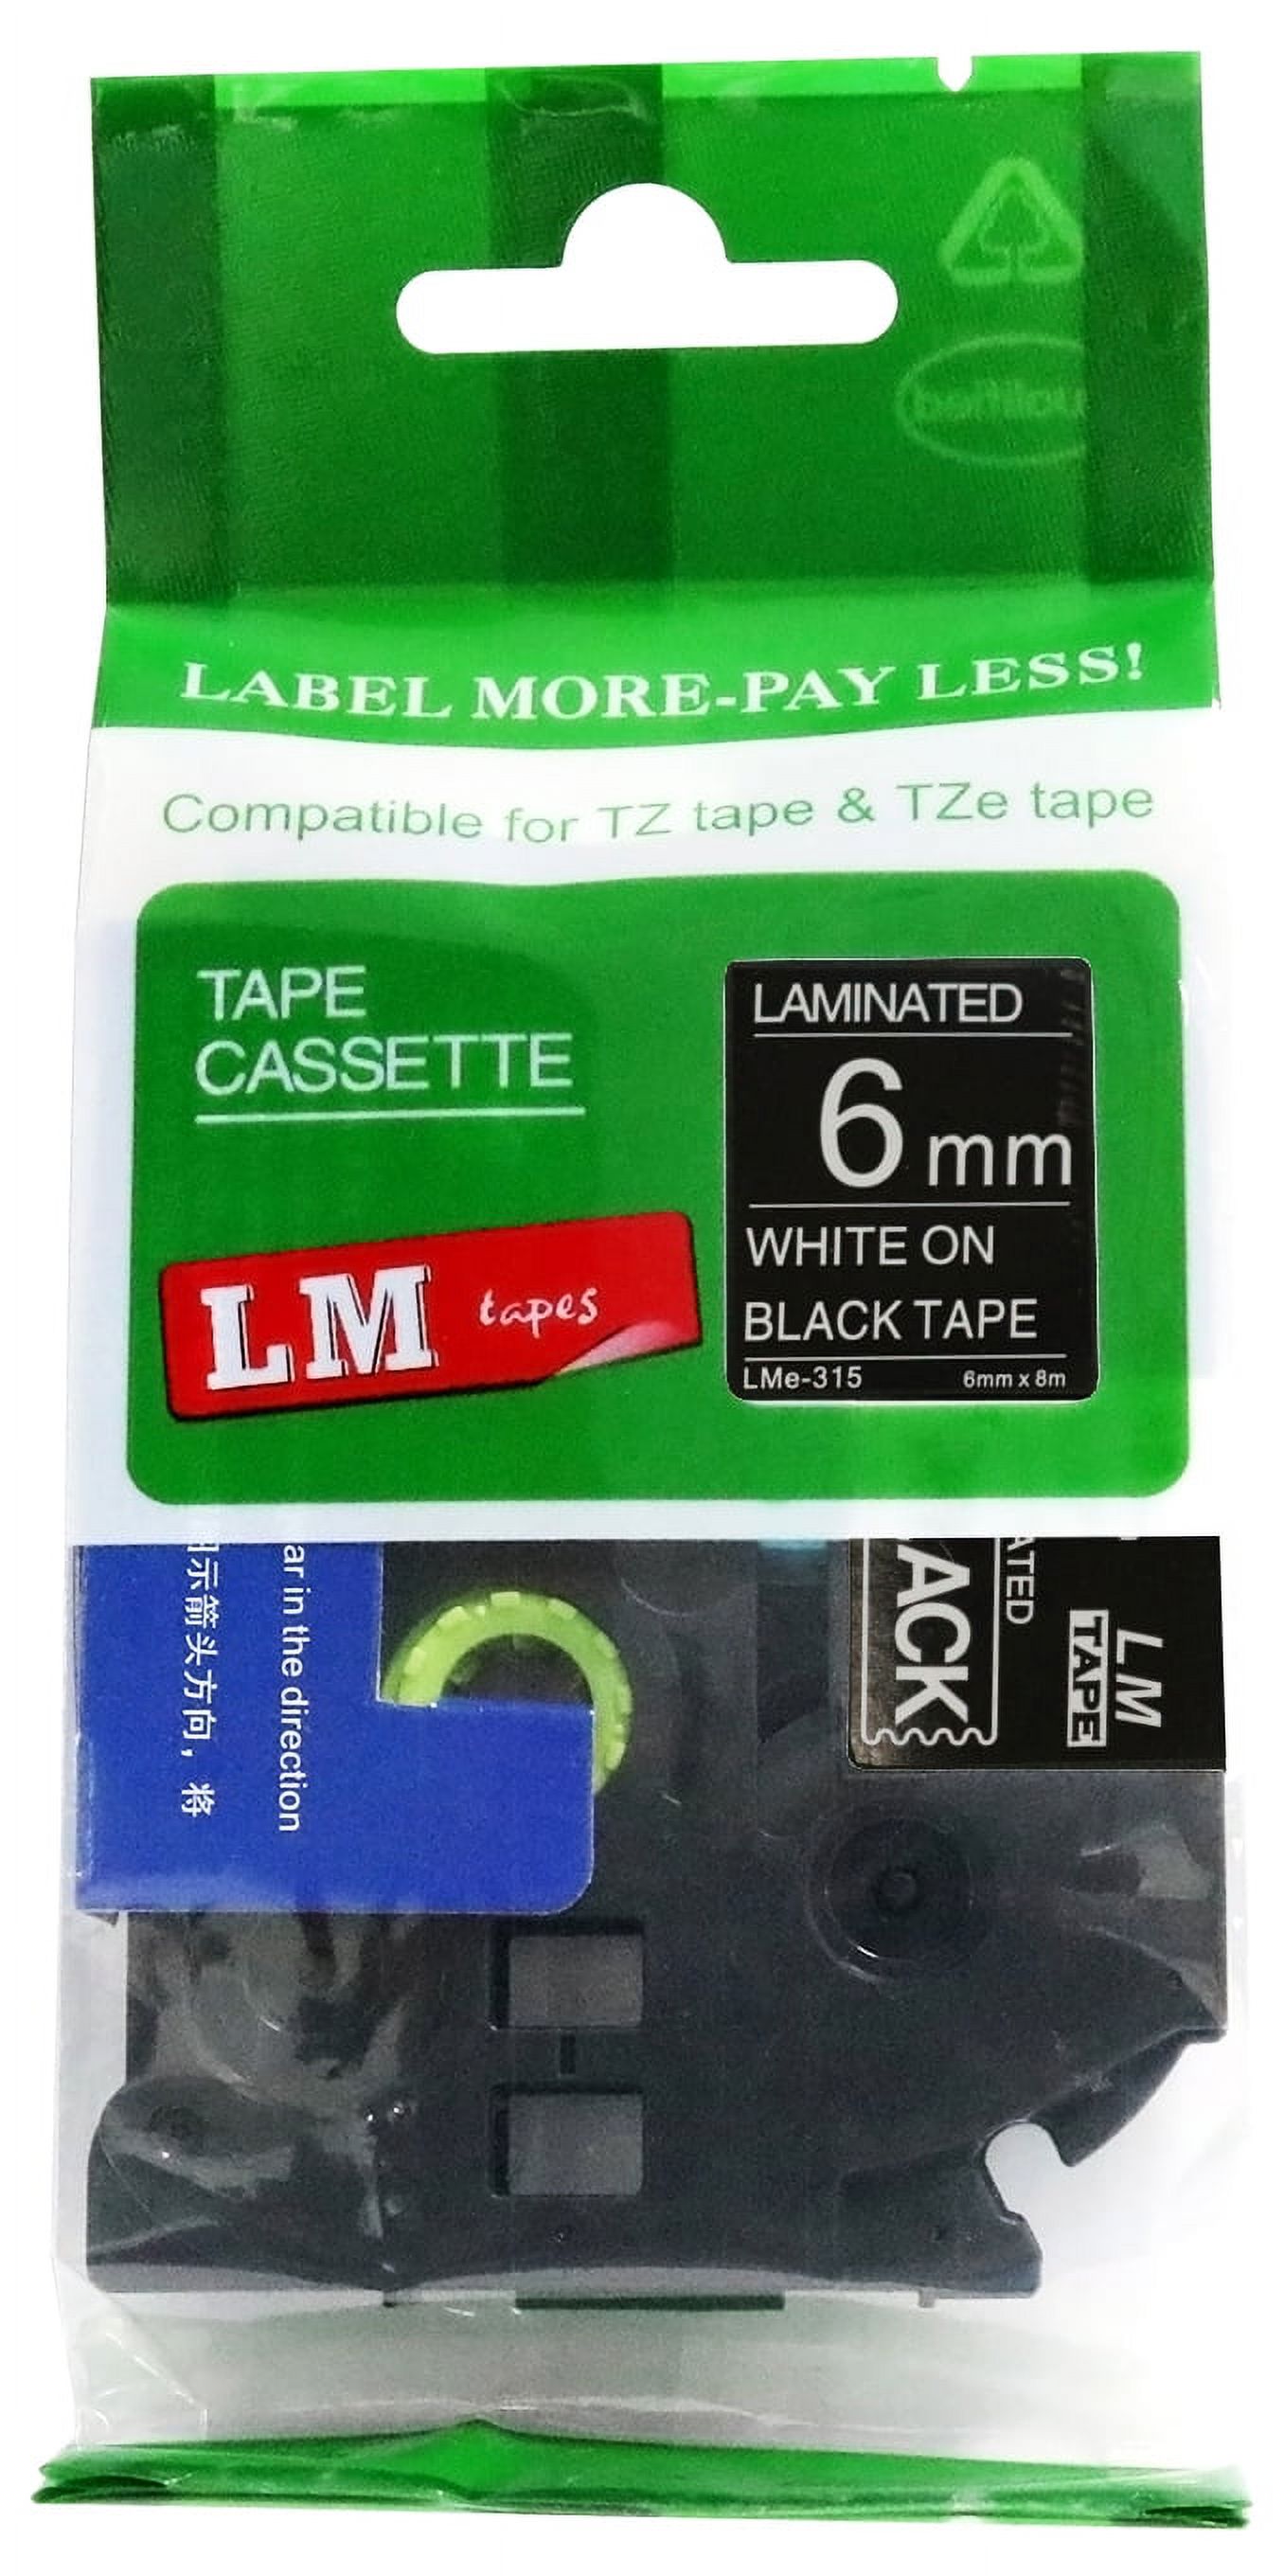 LM Tapes - Premium 1/4" White Print on Black Label (6mm 0.23 Laminated) compatible with TZe-315 P-touch Tape comes with Free Tape Color/Size Guide for easy reordering. - image 1 of 2